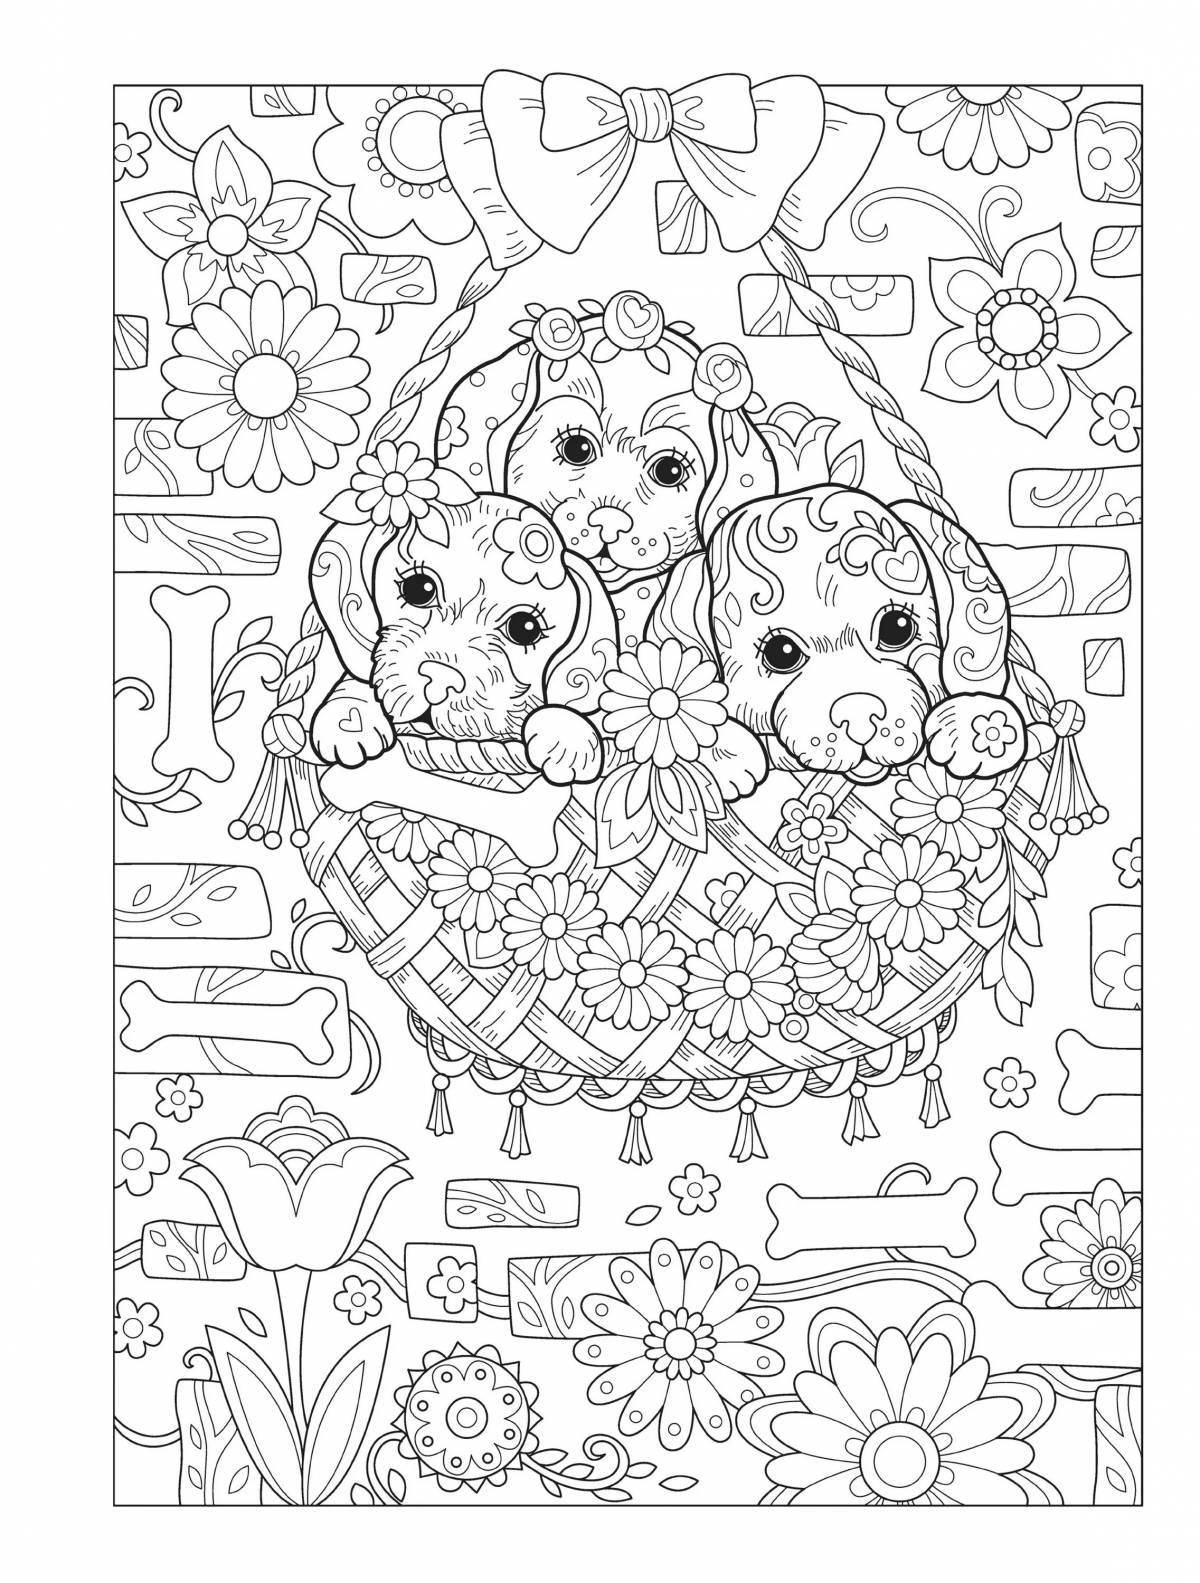 Radiant coloring book small for girls